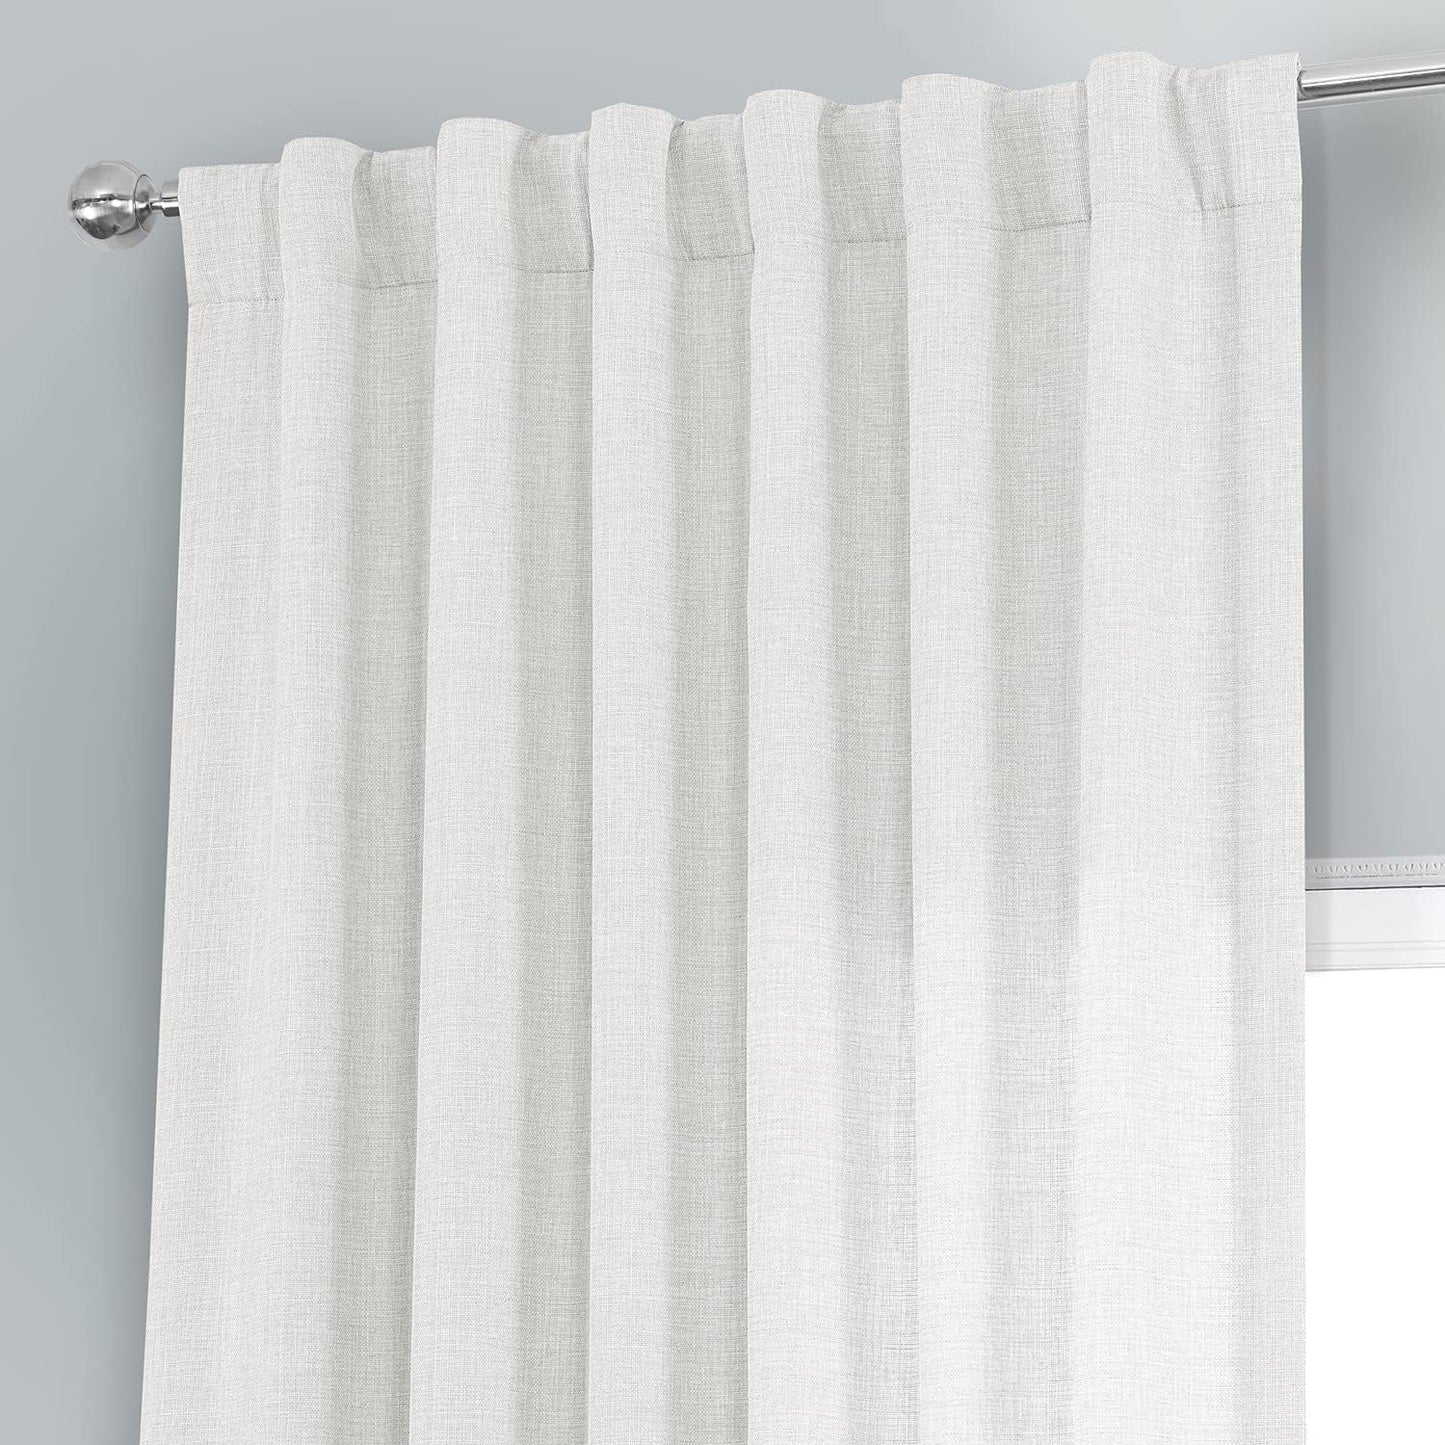 HPD HALF PRICE DRAPES Italian Linen Curtains for Bedroom & Living Room 84 Inches Long Room Darkening Curtains (1 Panel), 50W X 84L, Magnolia off White  Exclusive Fabrics & Furnishings   